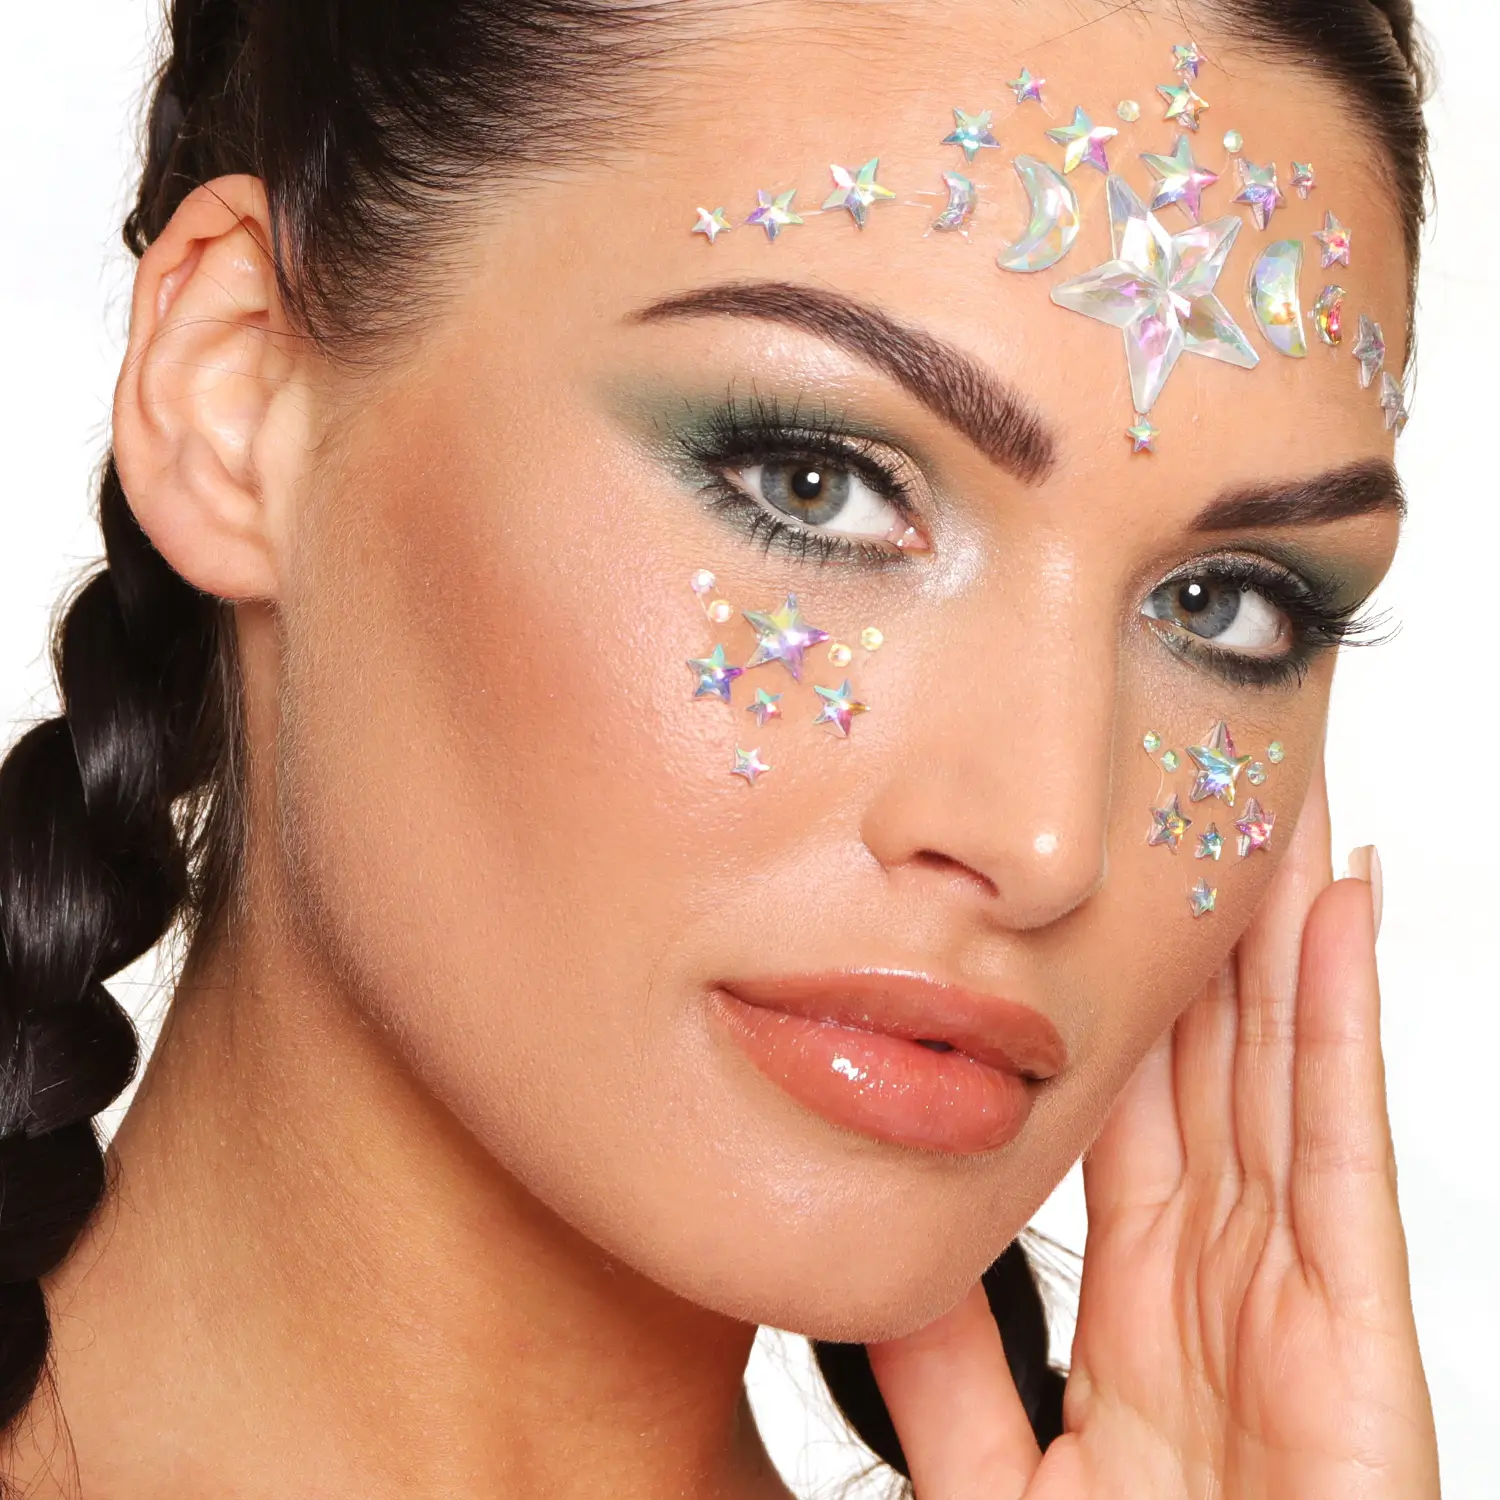 Starry Eyed Face Jewels on Model by Glitter Me Up ™ | PaintGlow